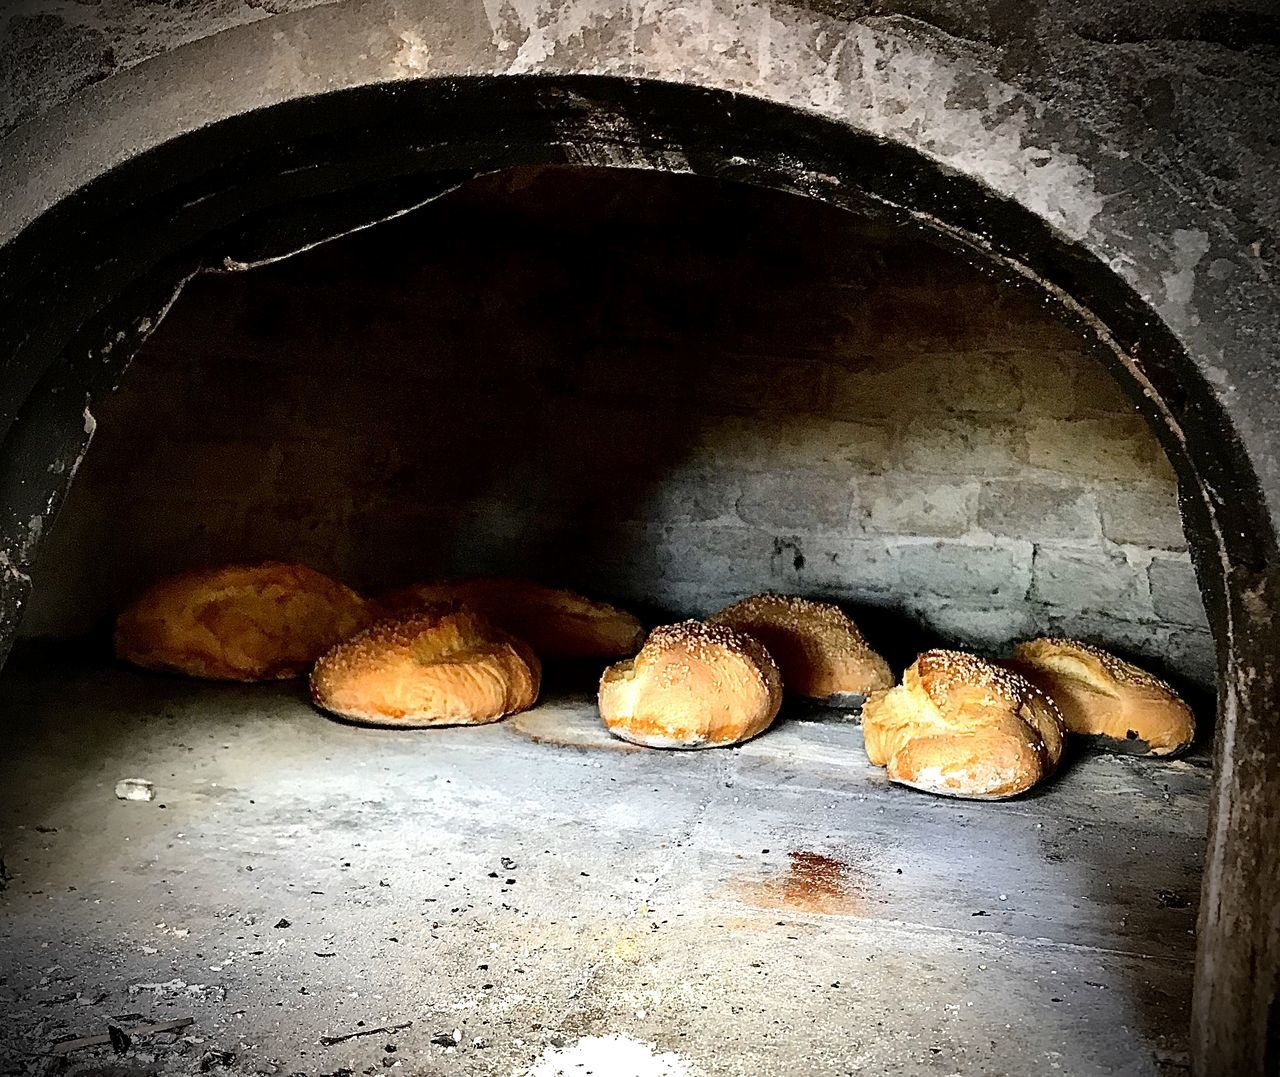 food, food and drink, darkness, no people, indoors, oven, freshness, cave, masonry oven, bread, still life, appliance, healthy eating, baking bread, wellbeing, close-up, baked